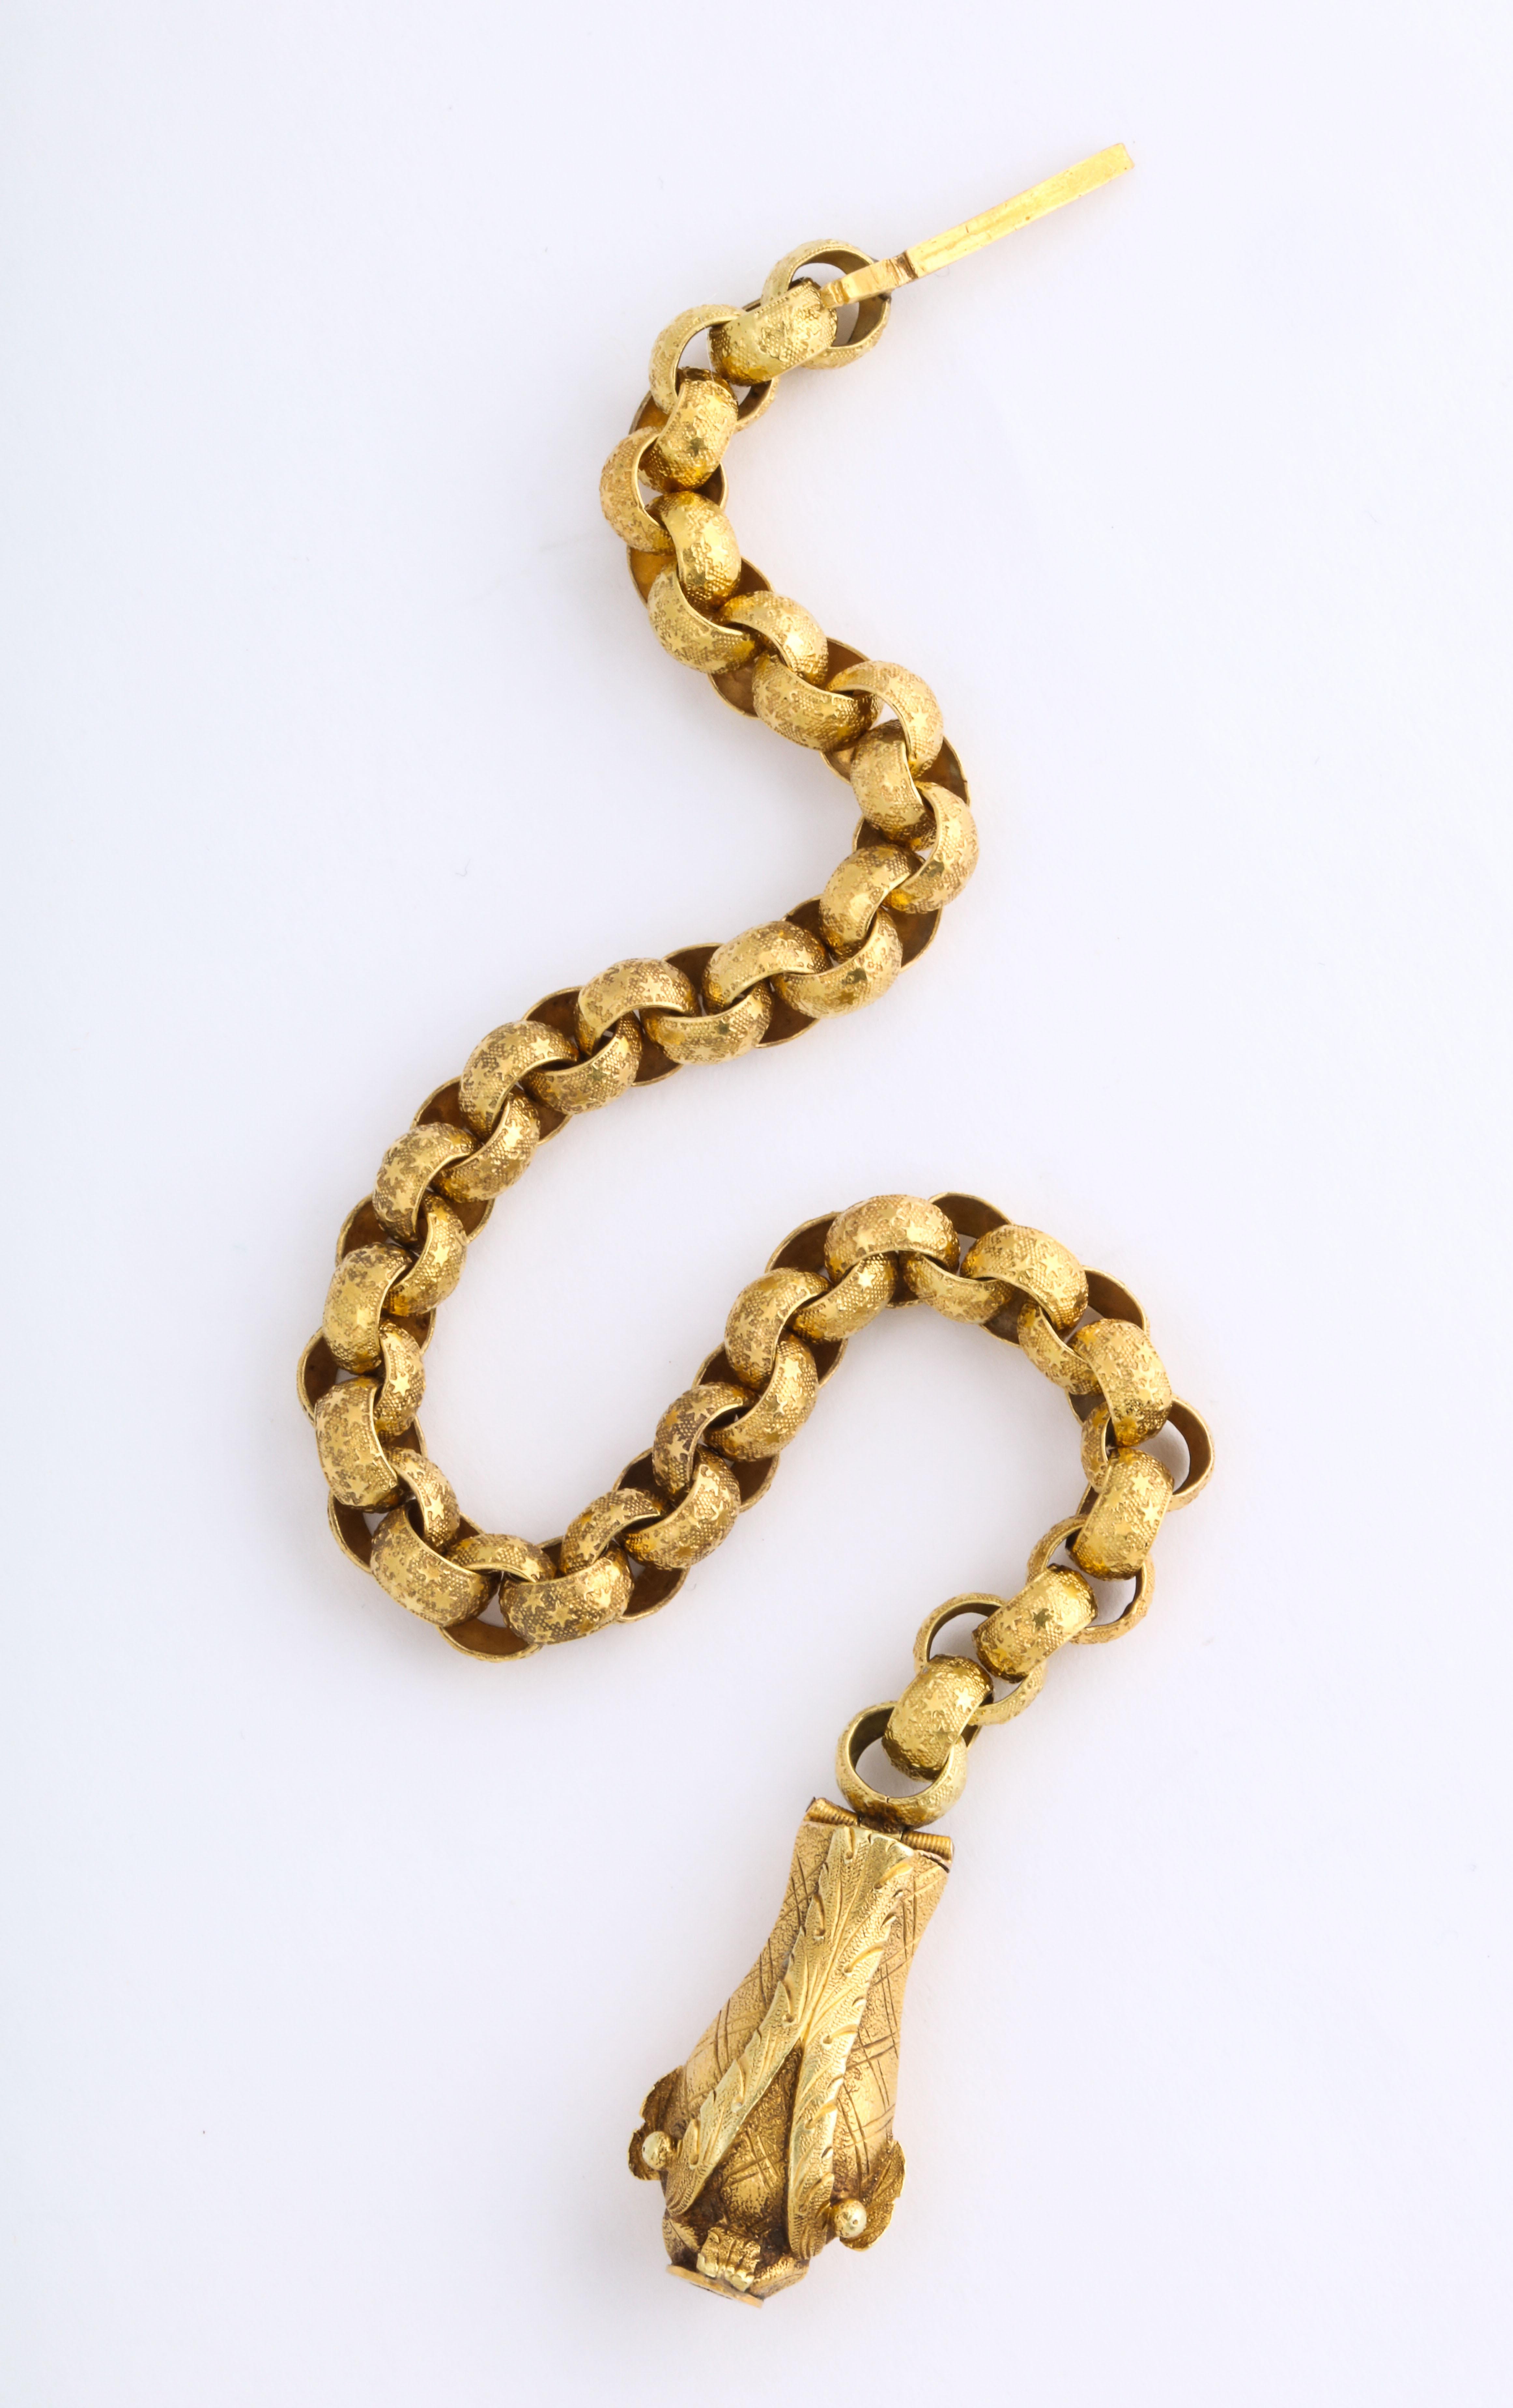 A rare 18 Kt gold link bracelet, constructed of alternating links, all in fine condition, is ingeniously clasped by the head of a dolphin, eyes searching and mouth open to hold the pin end of the clasp. The head is engraved with a cross hatch